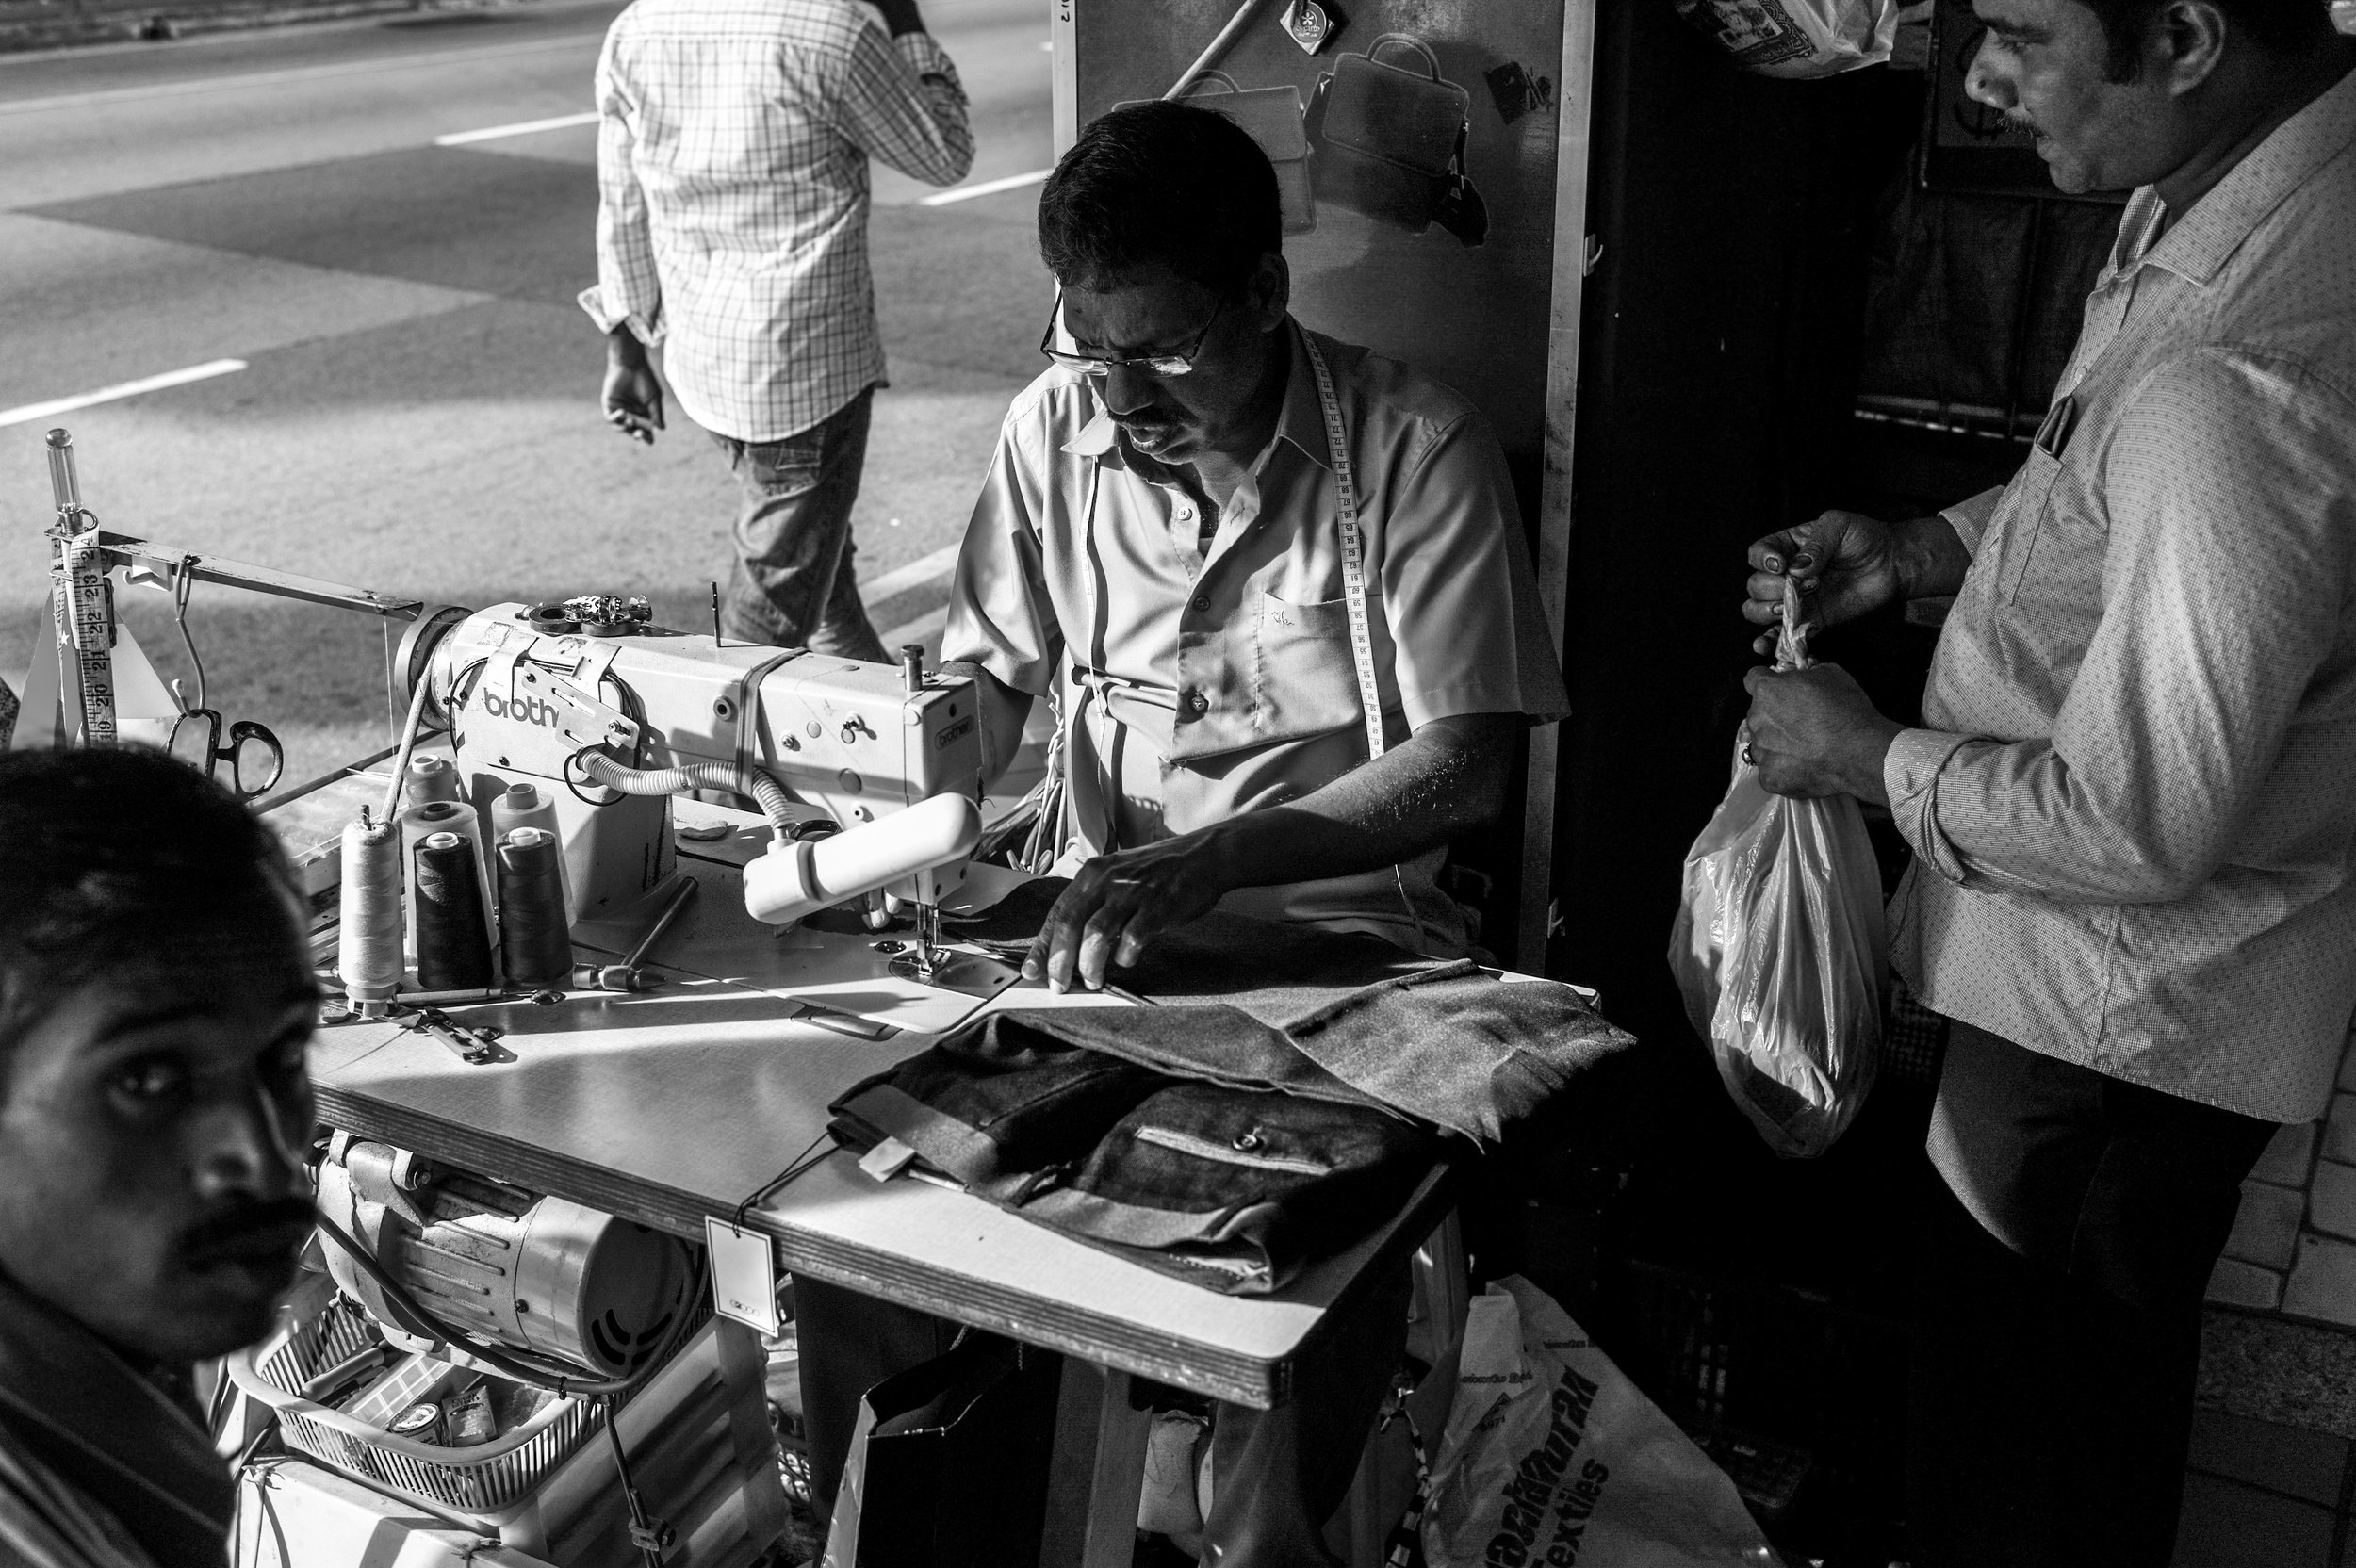   Services on a fast lane . A roadside tailor enjoys a relatively brisk business day as customers come forth to have their garments fixed. 